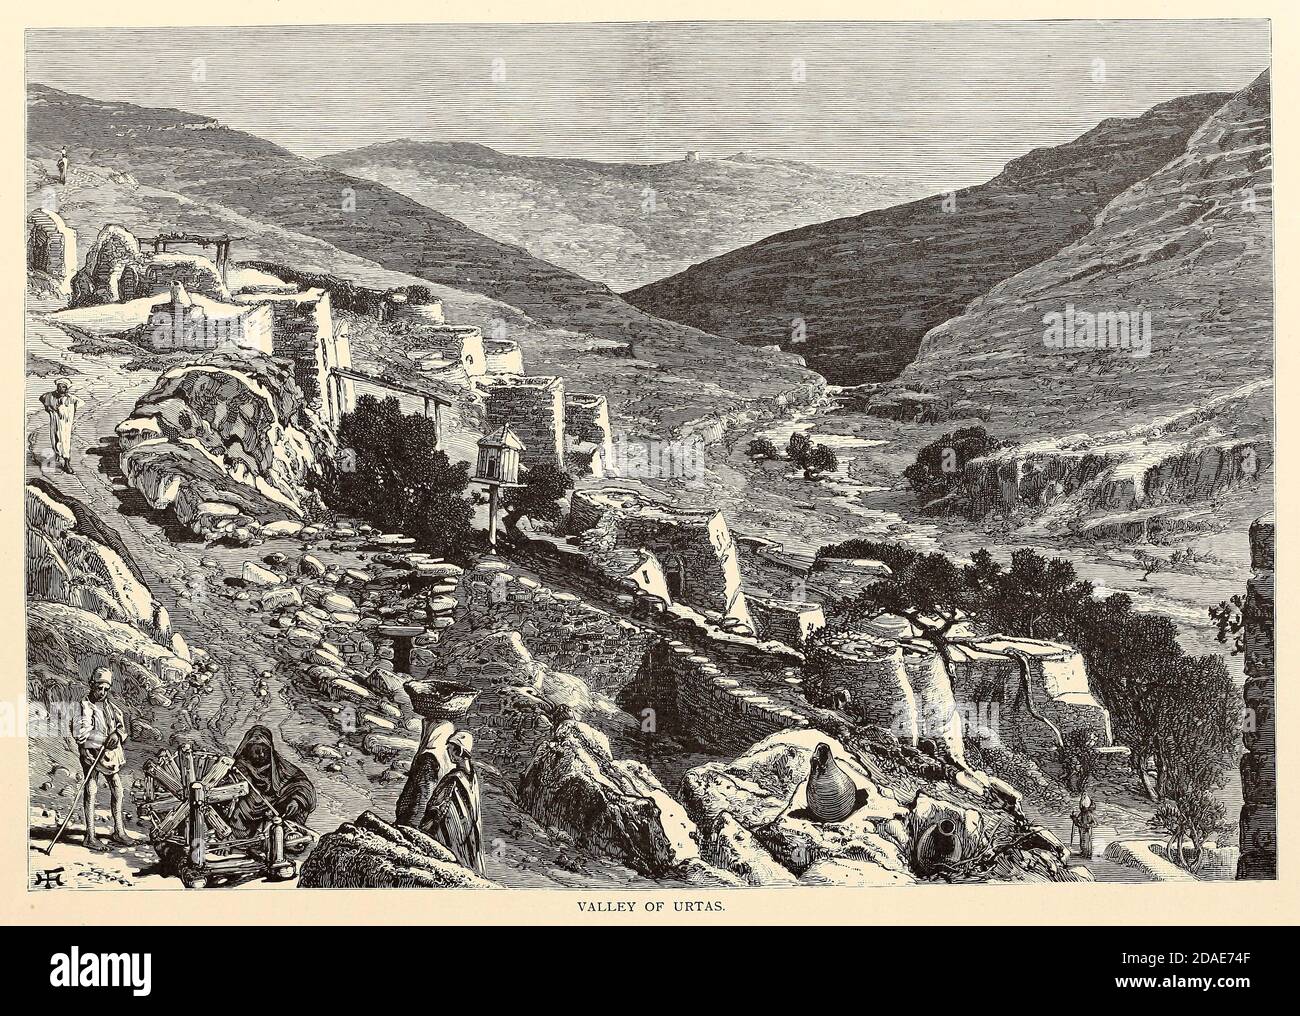 Valley of Urtas [Etam or Artas] from the book Picturesque Palestine, Sinai, and Egypt By  Colonel Wilson, Charles William, Sir, 1836-1905. Published in New York by D. Appleton and Company in 1881  with engravings in steel and wood from original Drawings by Harry Fenn and J. D. Woodward Volume 1 Stock Photo